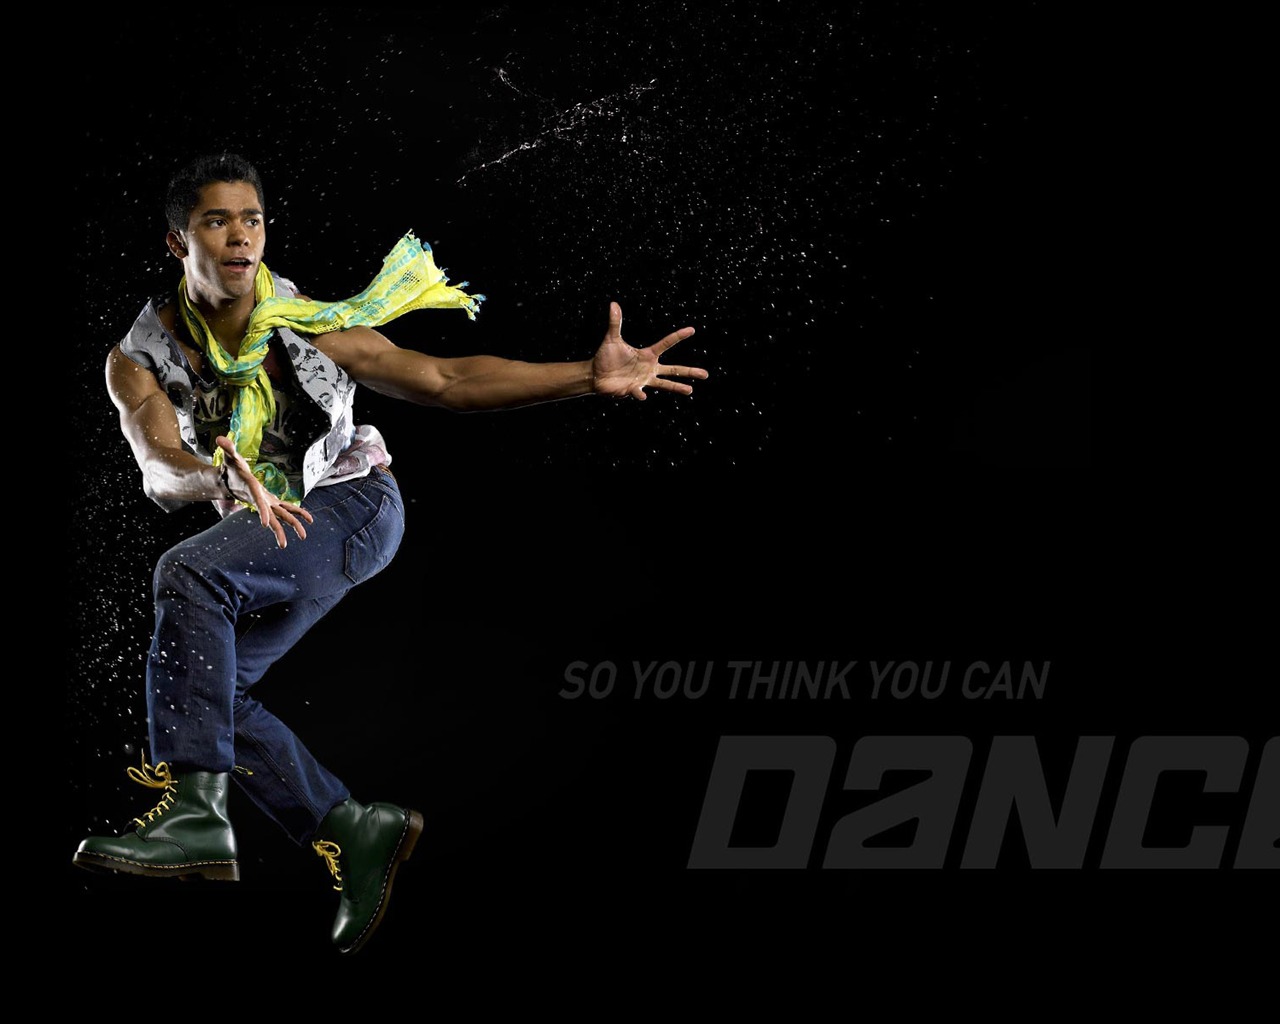 So You Think You Can Dance 舞林争霸 壁纸(一)2 - 1280x1024